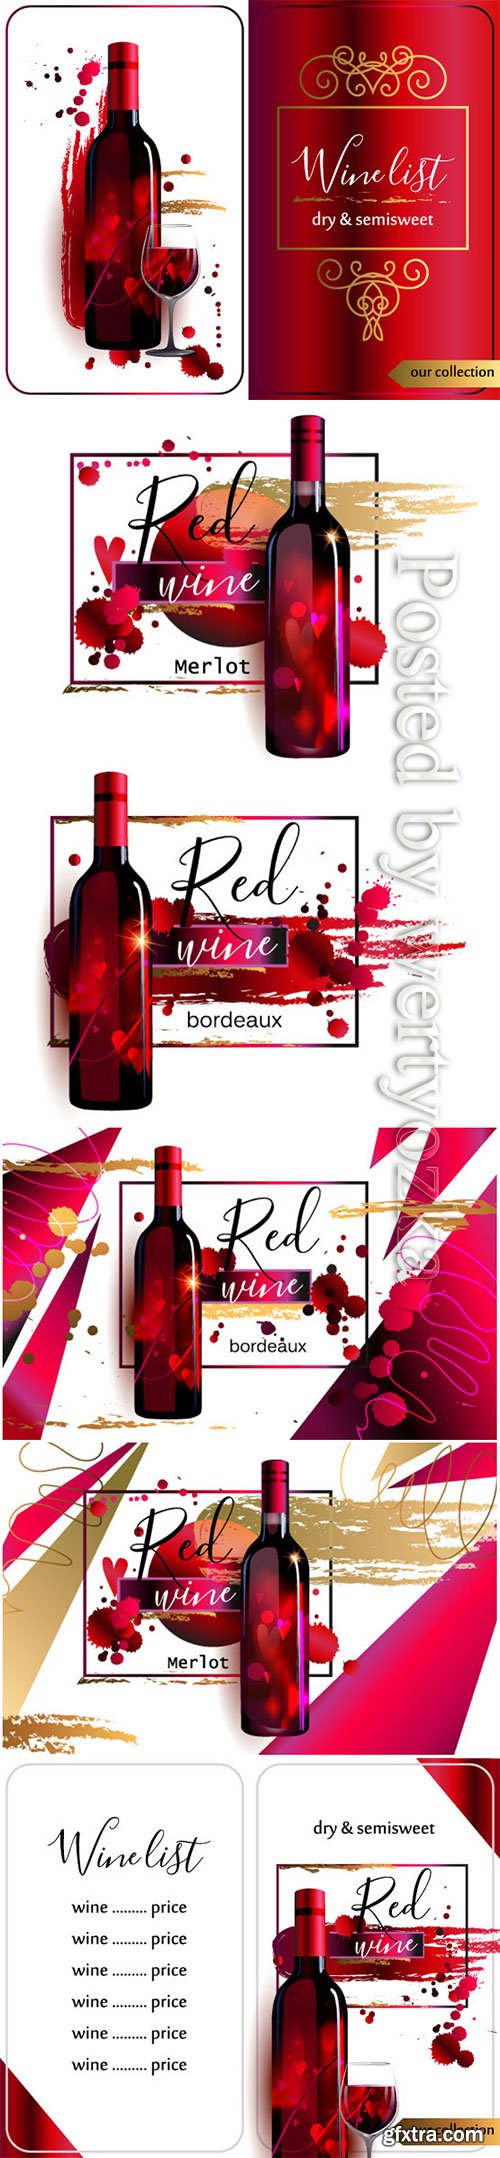 template-of-wine-list-gfxtra